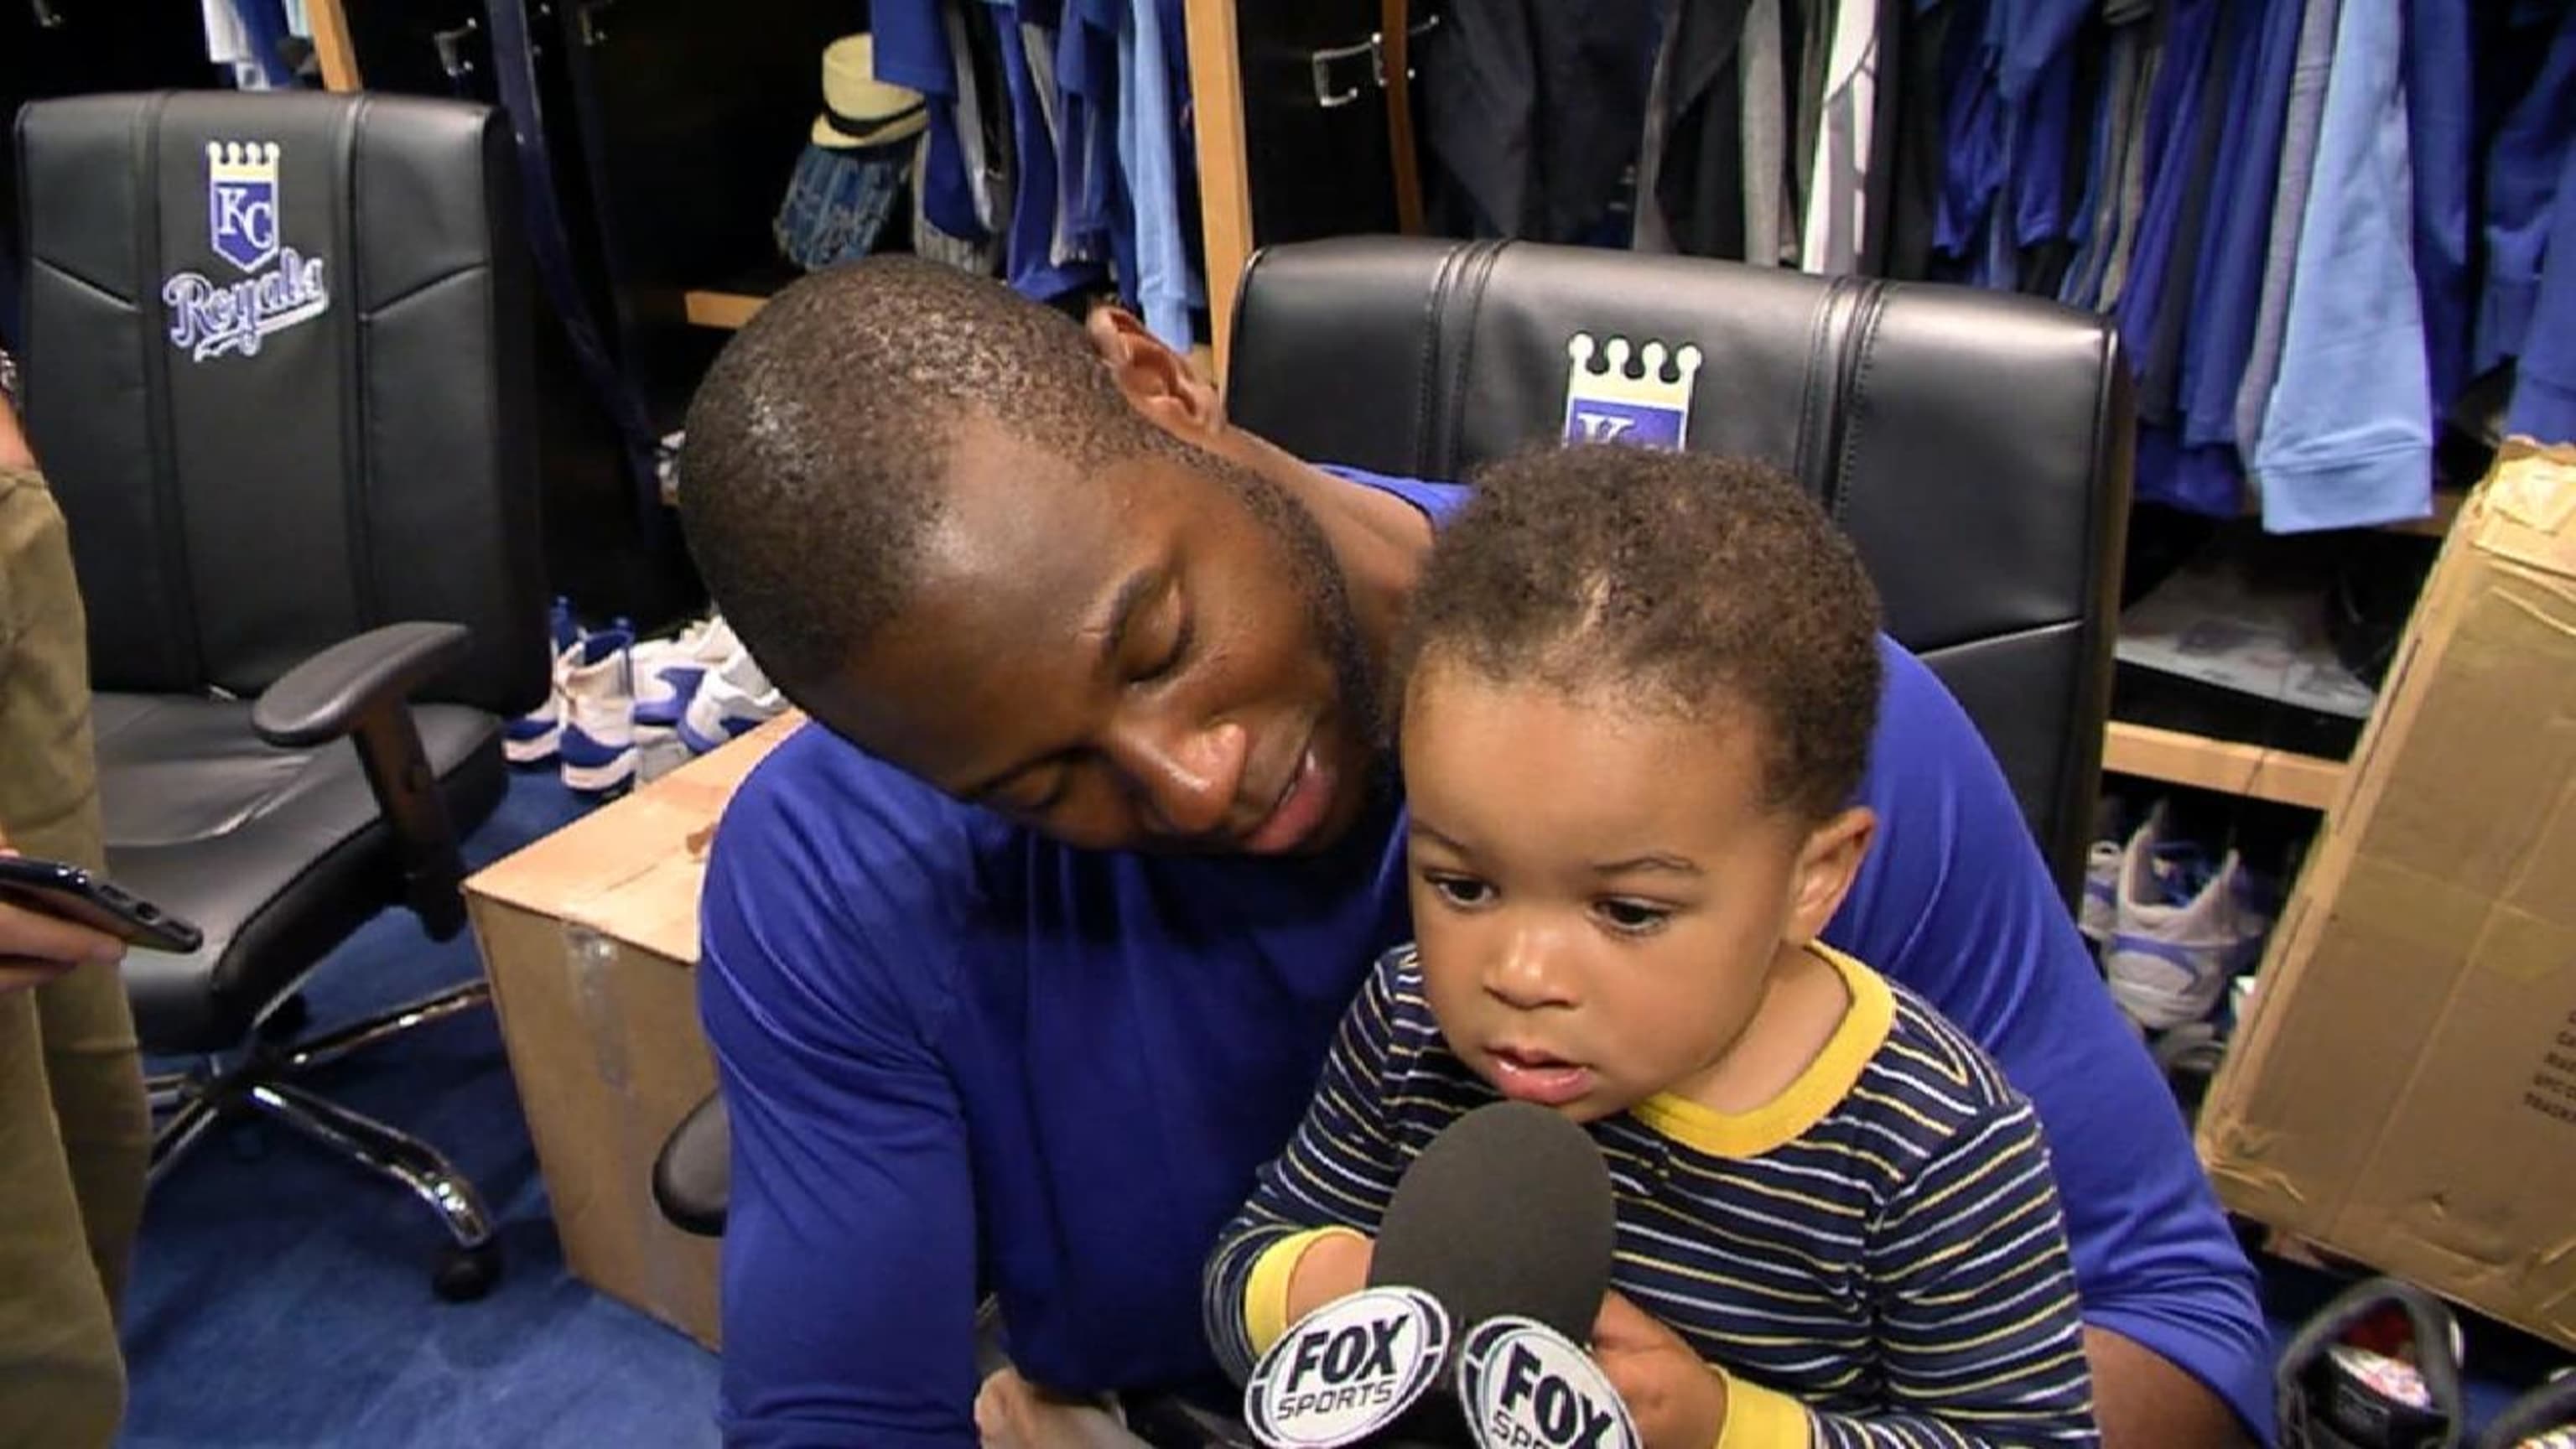 Lorenzo Cain's son, Cameron, did not want to give a postgame